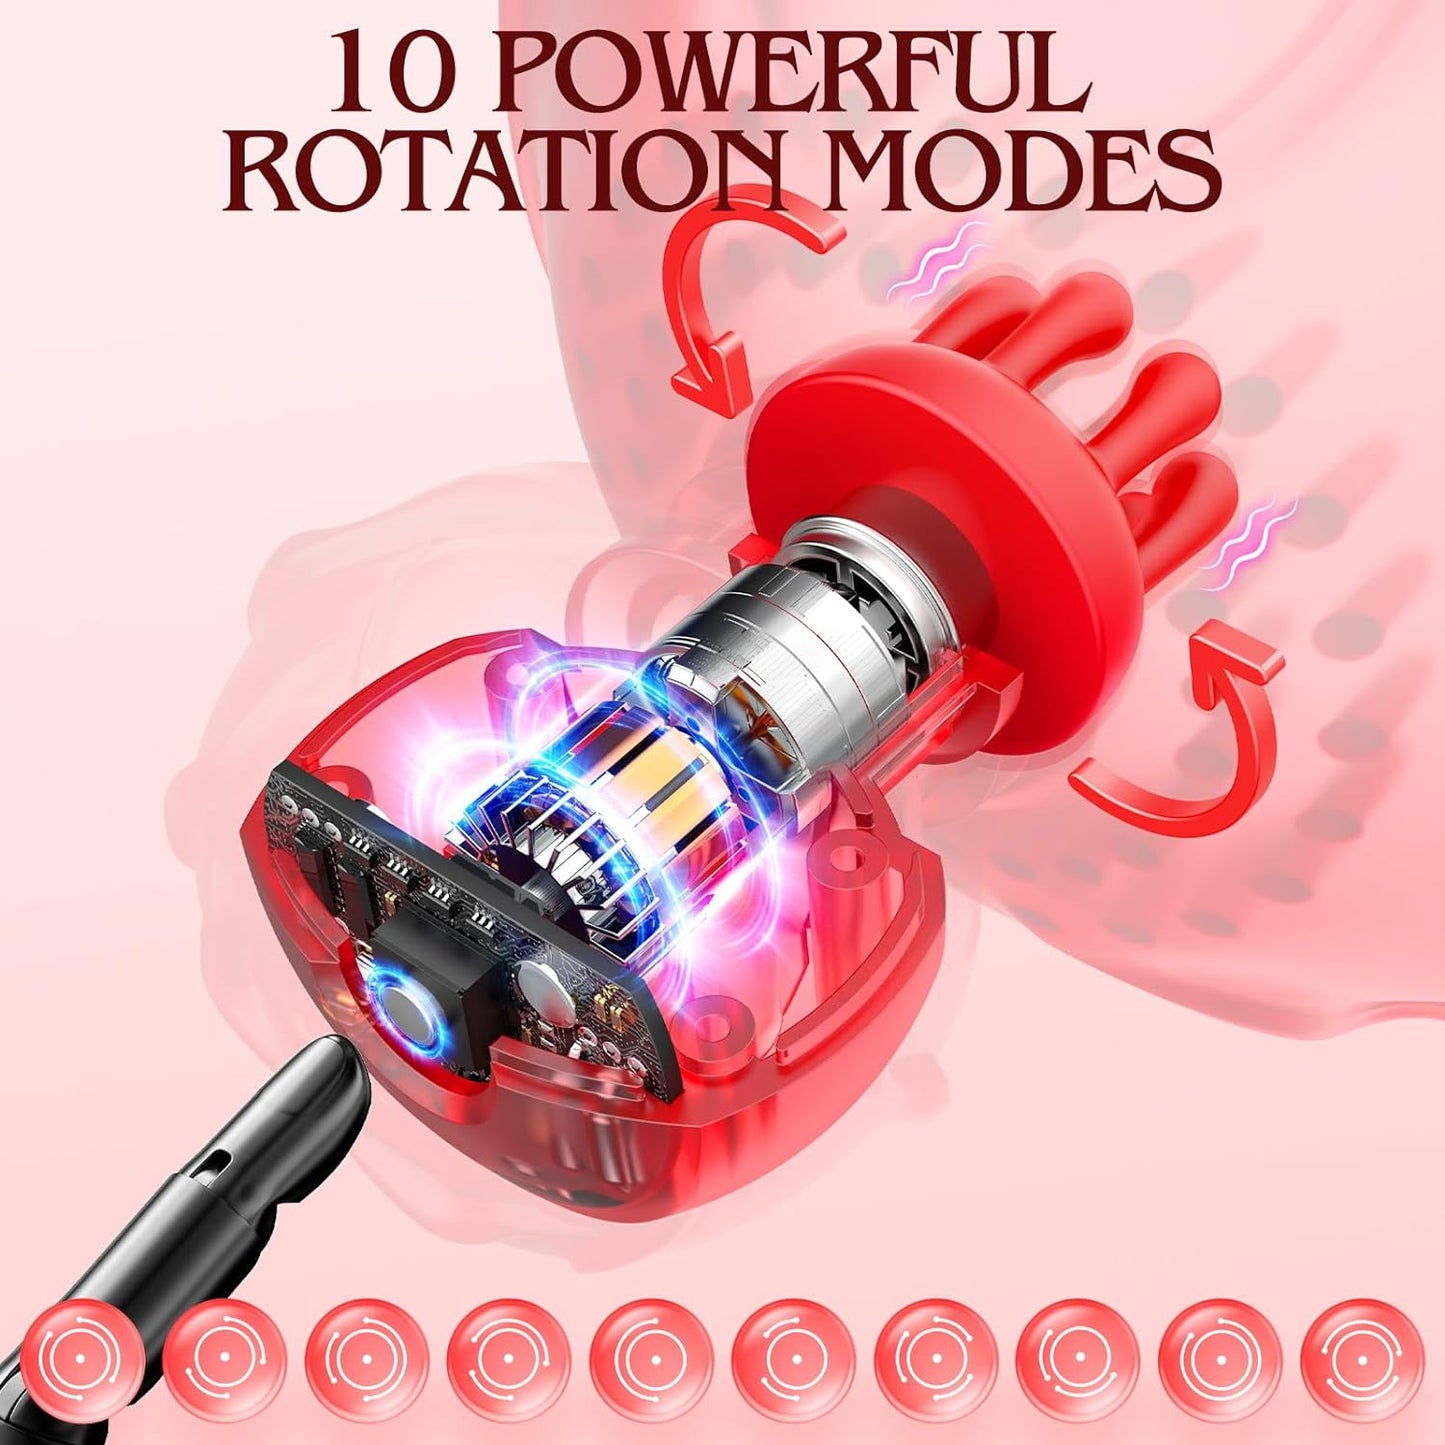 Sex Toys Nipple Toys Rotation - Rose Sex Toy Sucking Stimulator Wireless Nipple Clamps with 10 Powerful Vibration Rotation Modes, Rechargeable Adult Sex Toys for Women Couples Pleasure Red